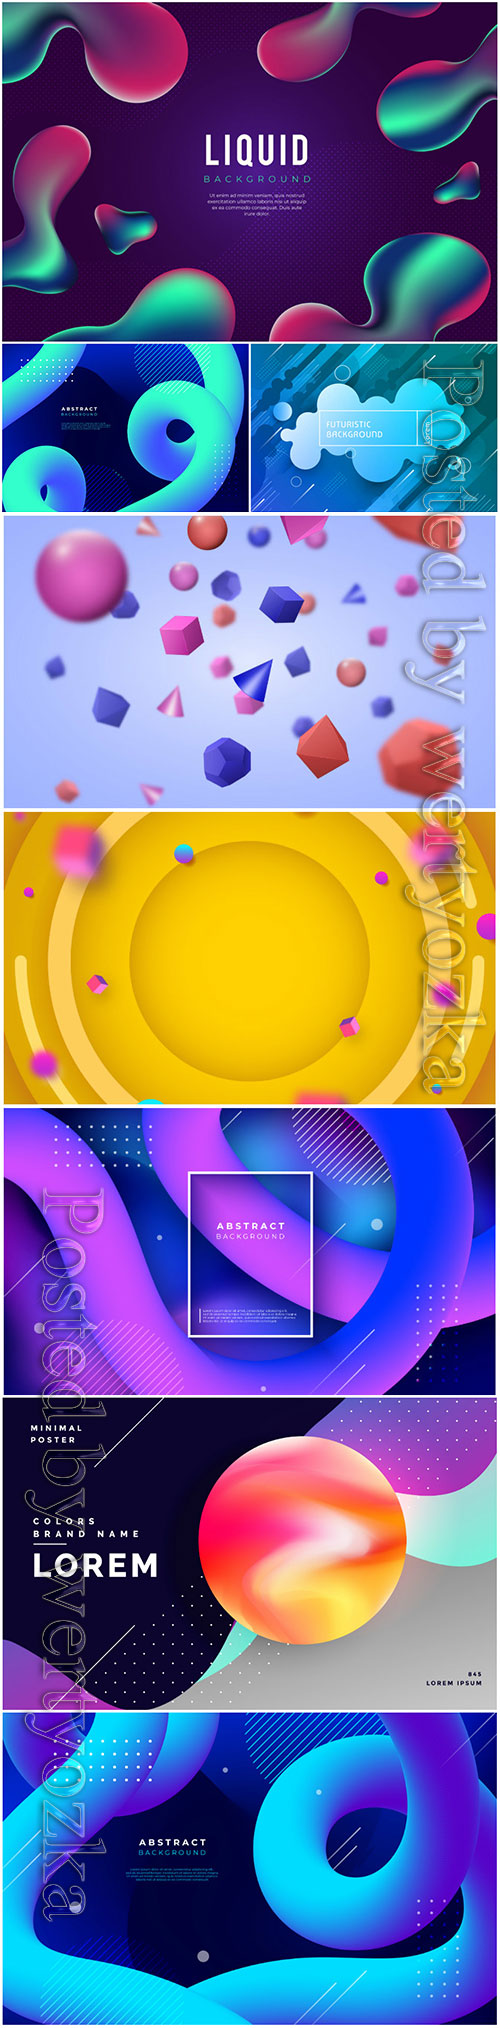 Abstract vector background with liquid shapes, 3d models template